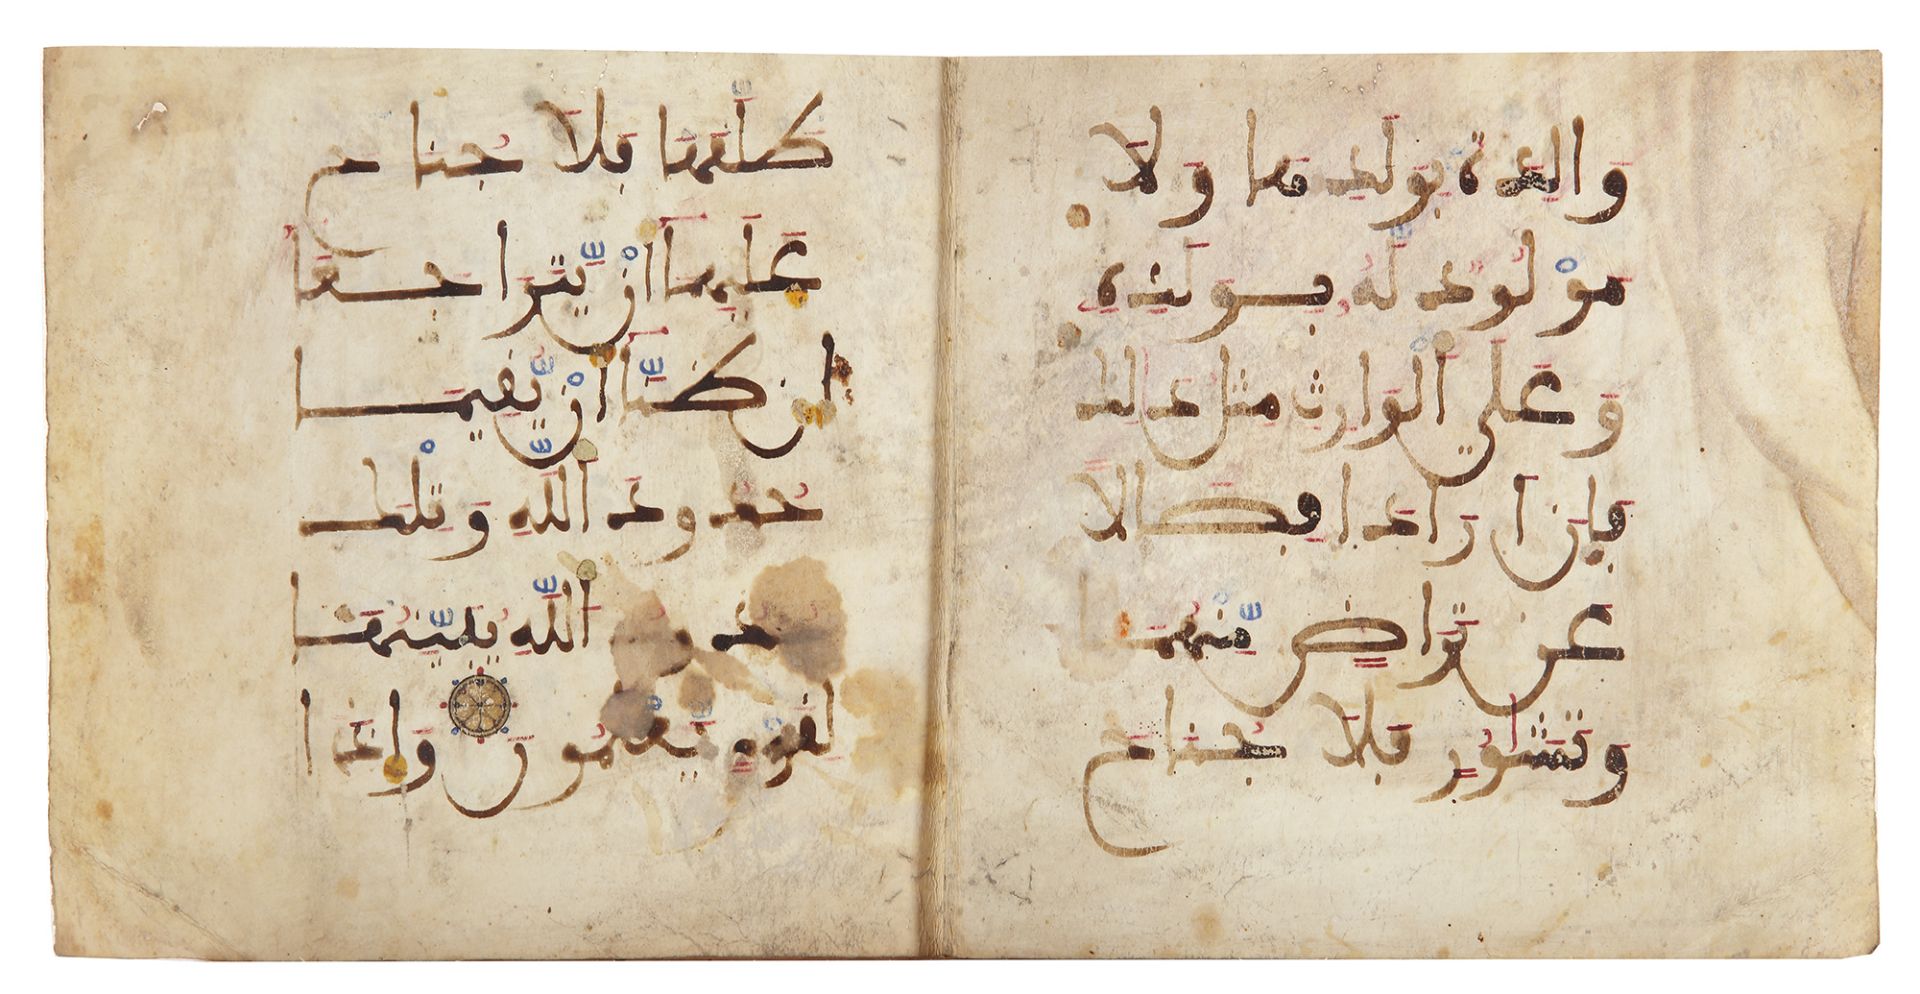 TWO MAGHRIBI QURAN FOLIOS, NORTH AFRICA OR ANDALUSIA, 12TH-13TH CENTURY